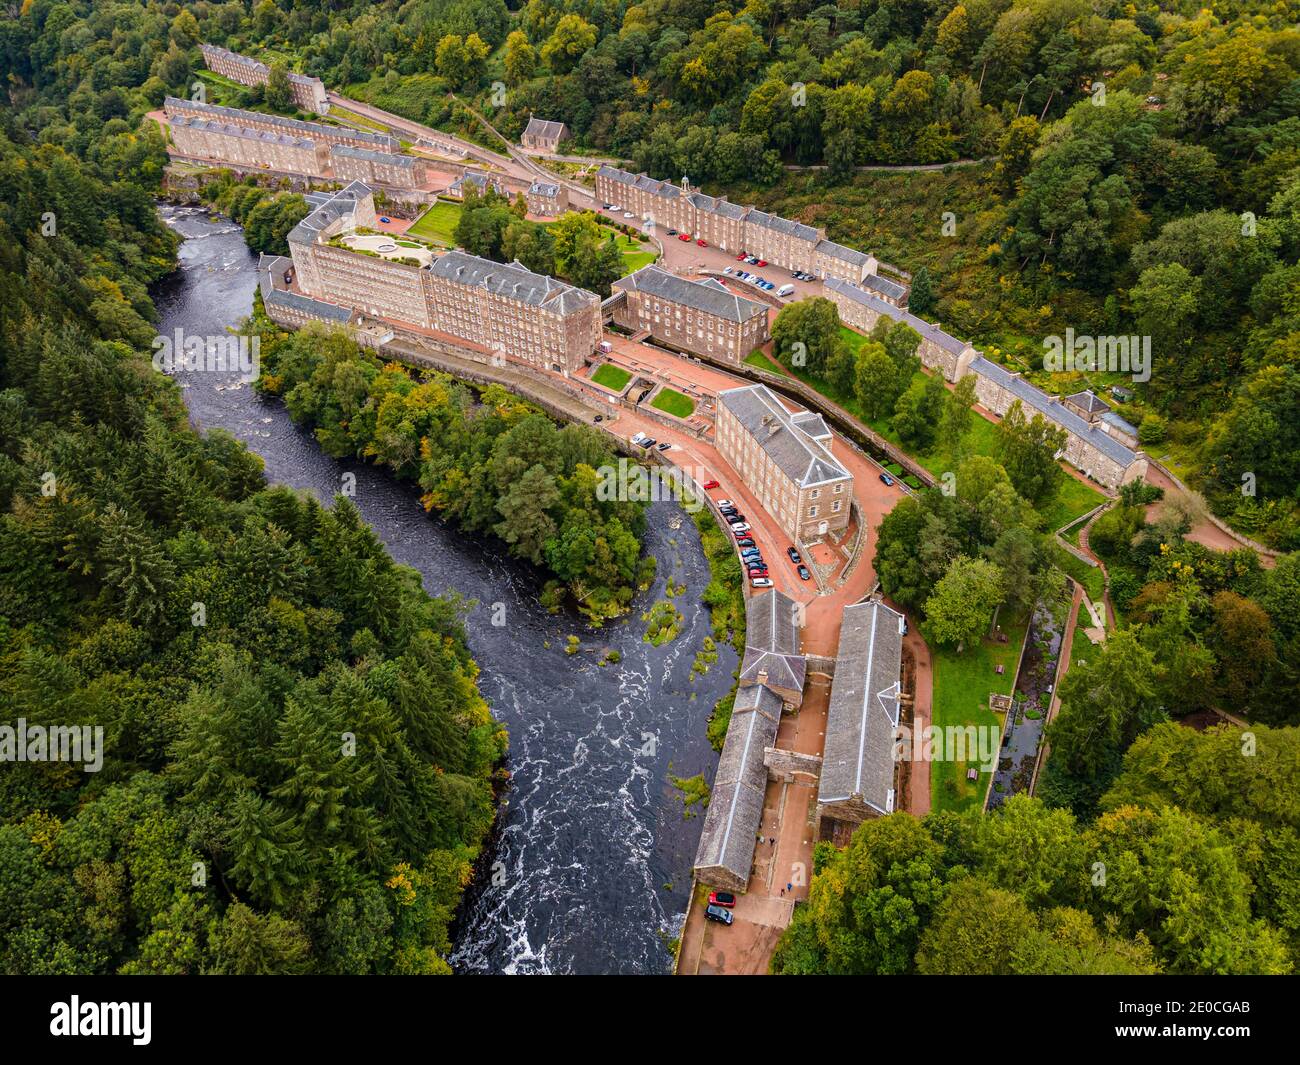 Aerial of the industrial town of New Lanark, UNESCO World Heritage Site, Scotland, United Kingdom, Europe Stock Photo